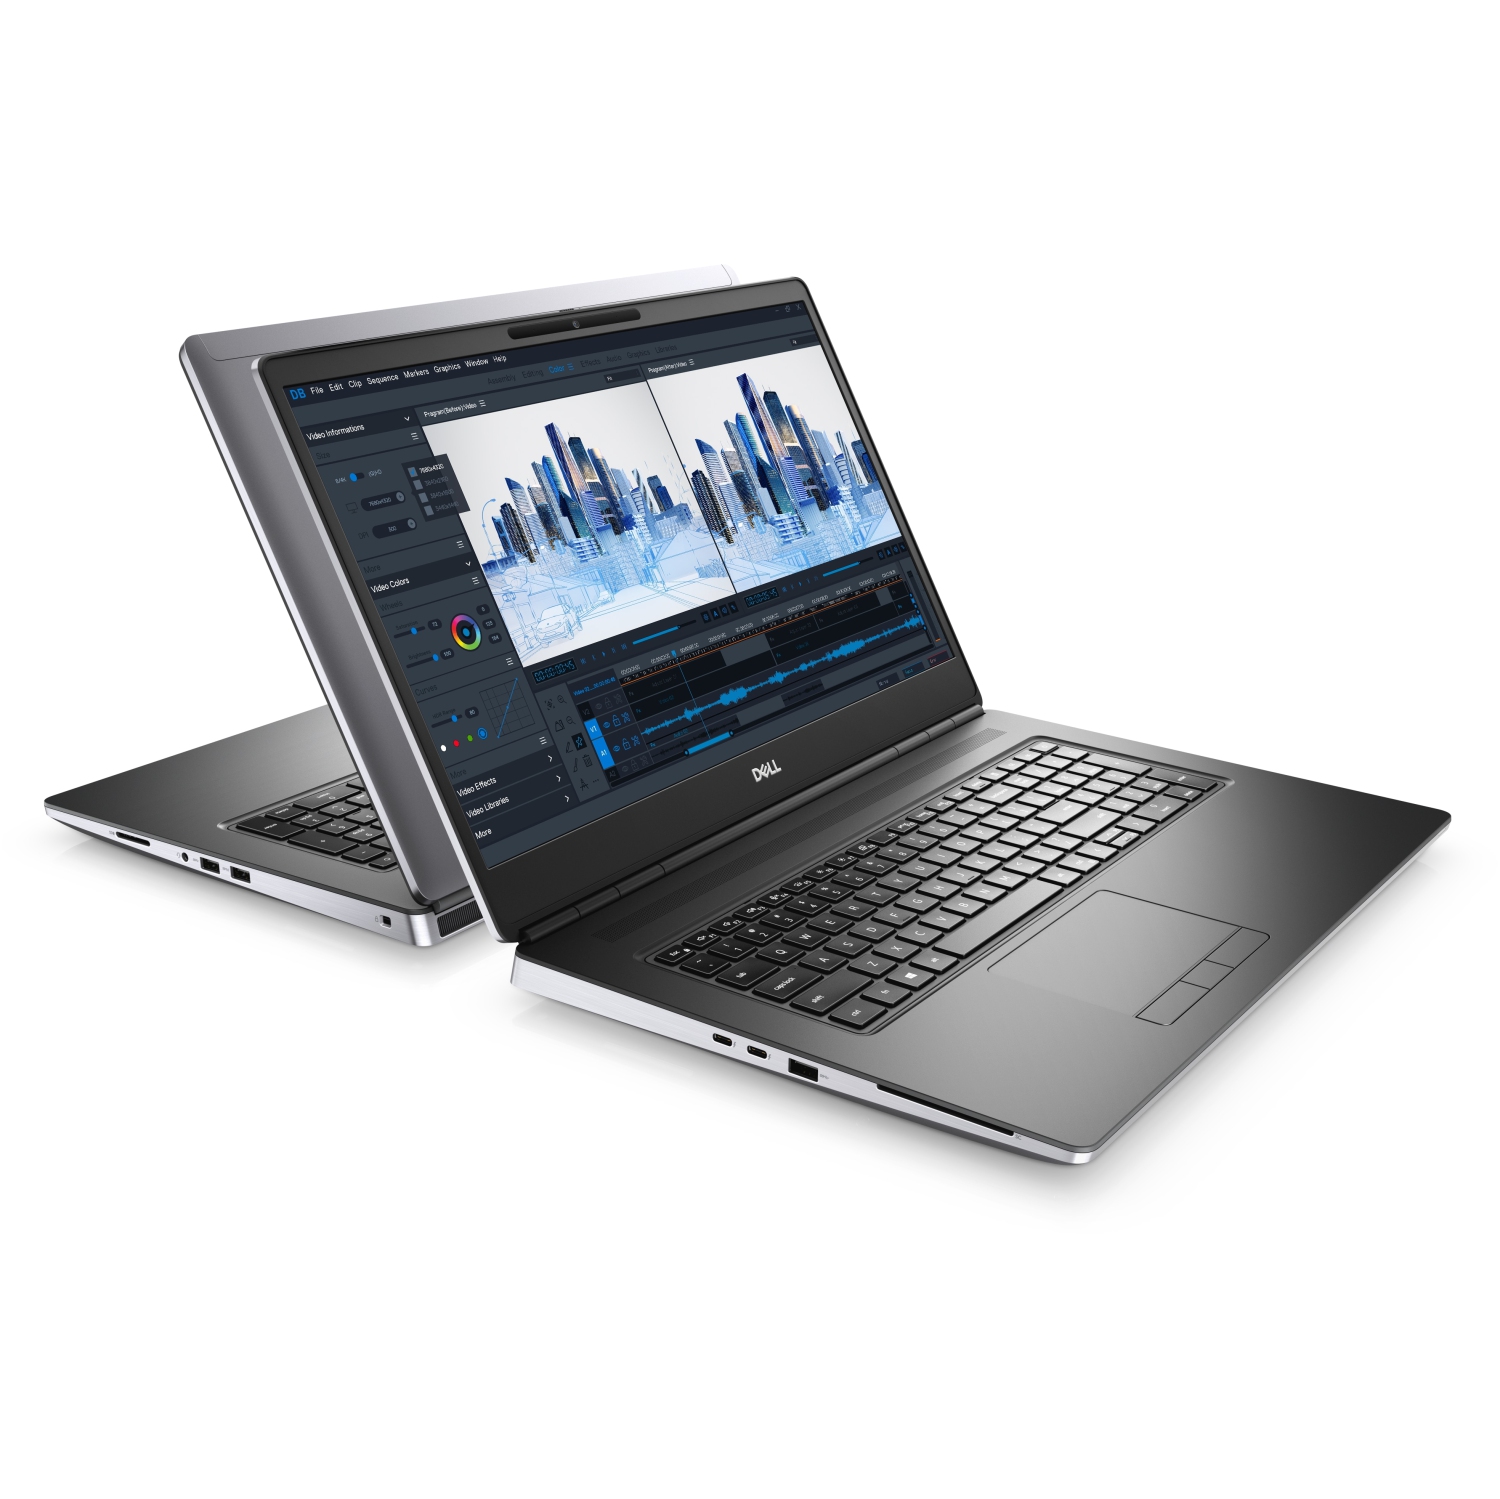 Refurbished (Excellent) - Dell Precision 7000 7760 Workstation Laptop (2021), 17.3" FHD, Core i9, 1TB SSD, 32GB RAM, RTX A5000, 8 Cores @ 5 GHz, 11th Gen CPU Certified